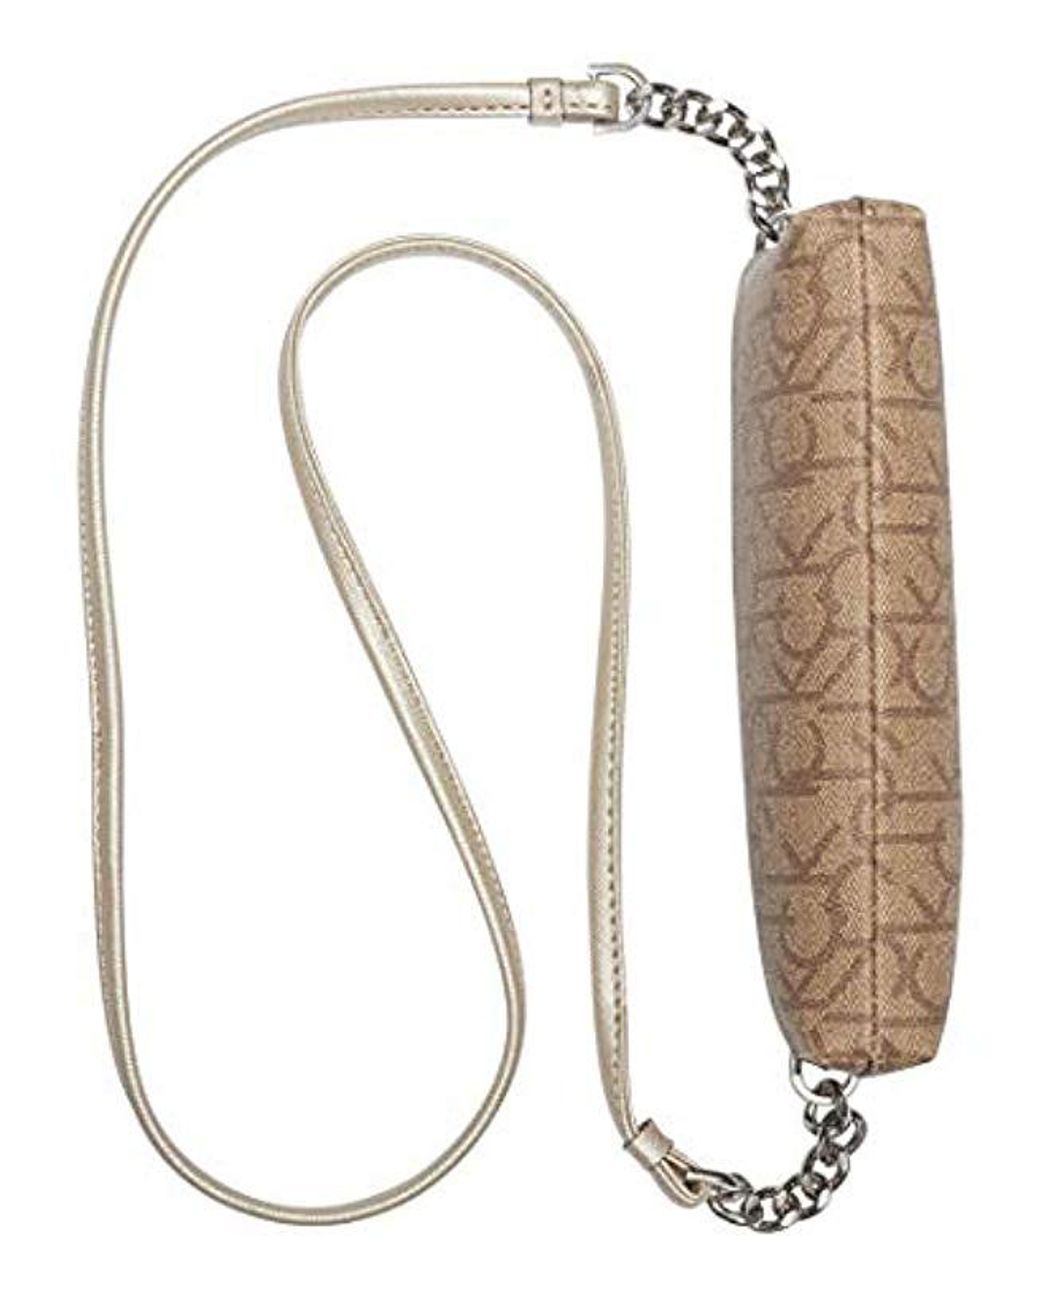 Buy Calvin Klein Lucy Triple Compartment Shoulder Bag, Almond/Taupe/Caramel  Embossed, One Size at